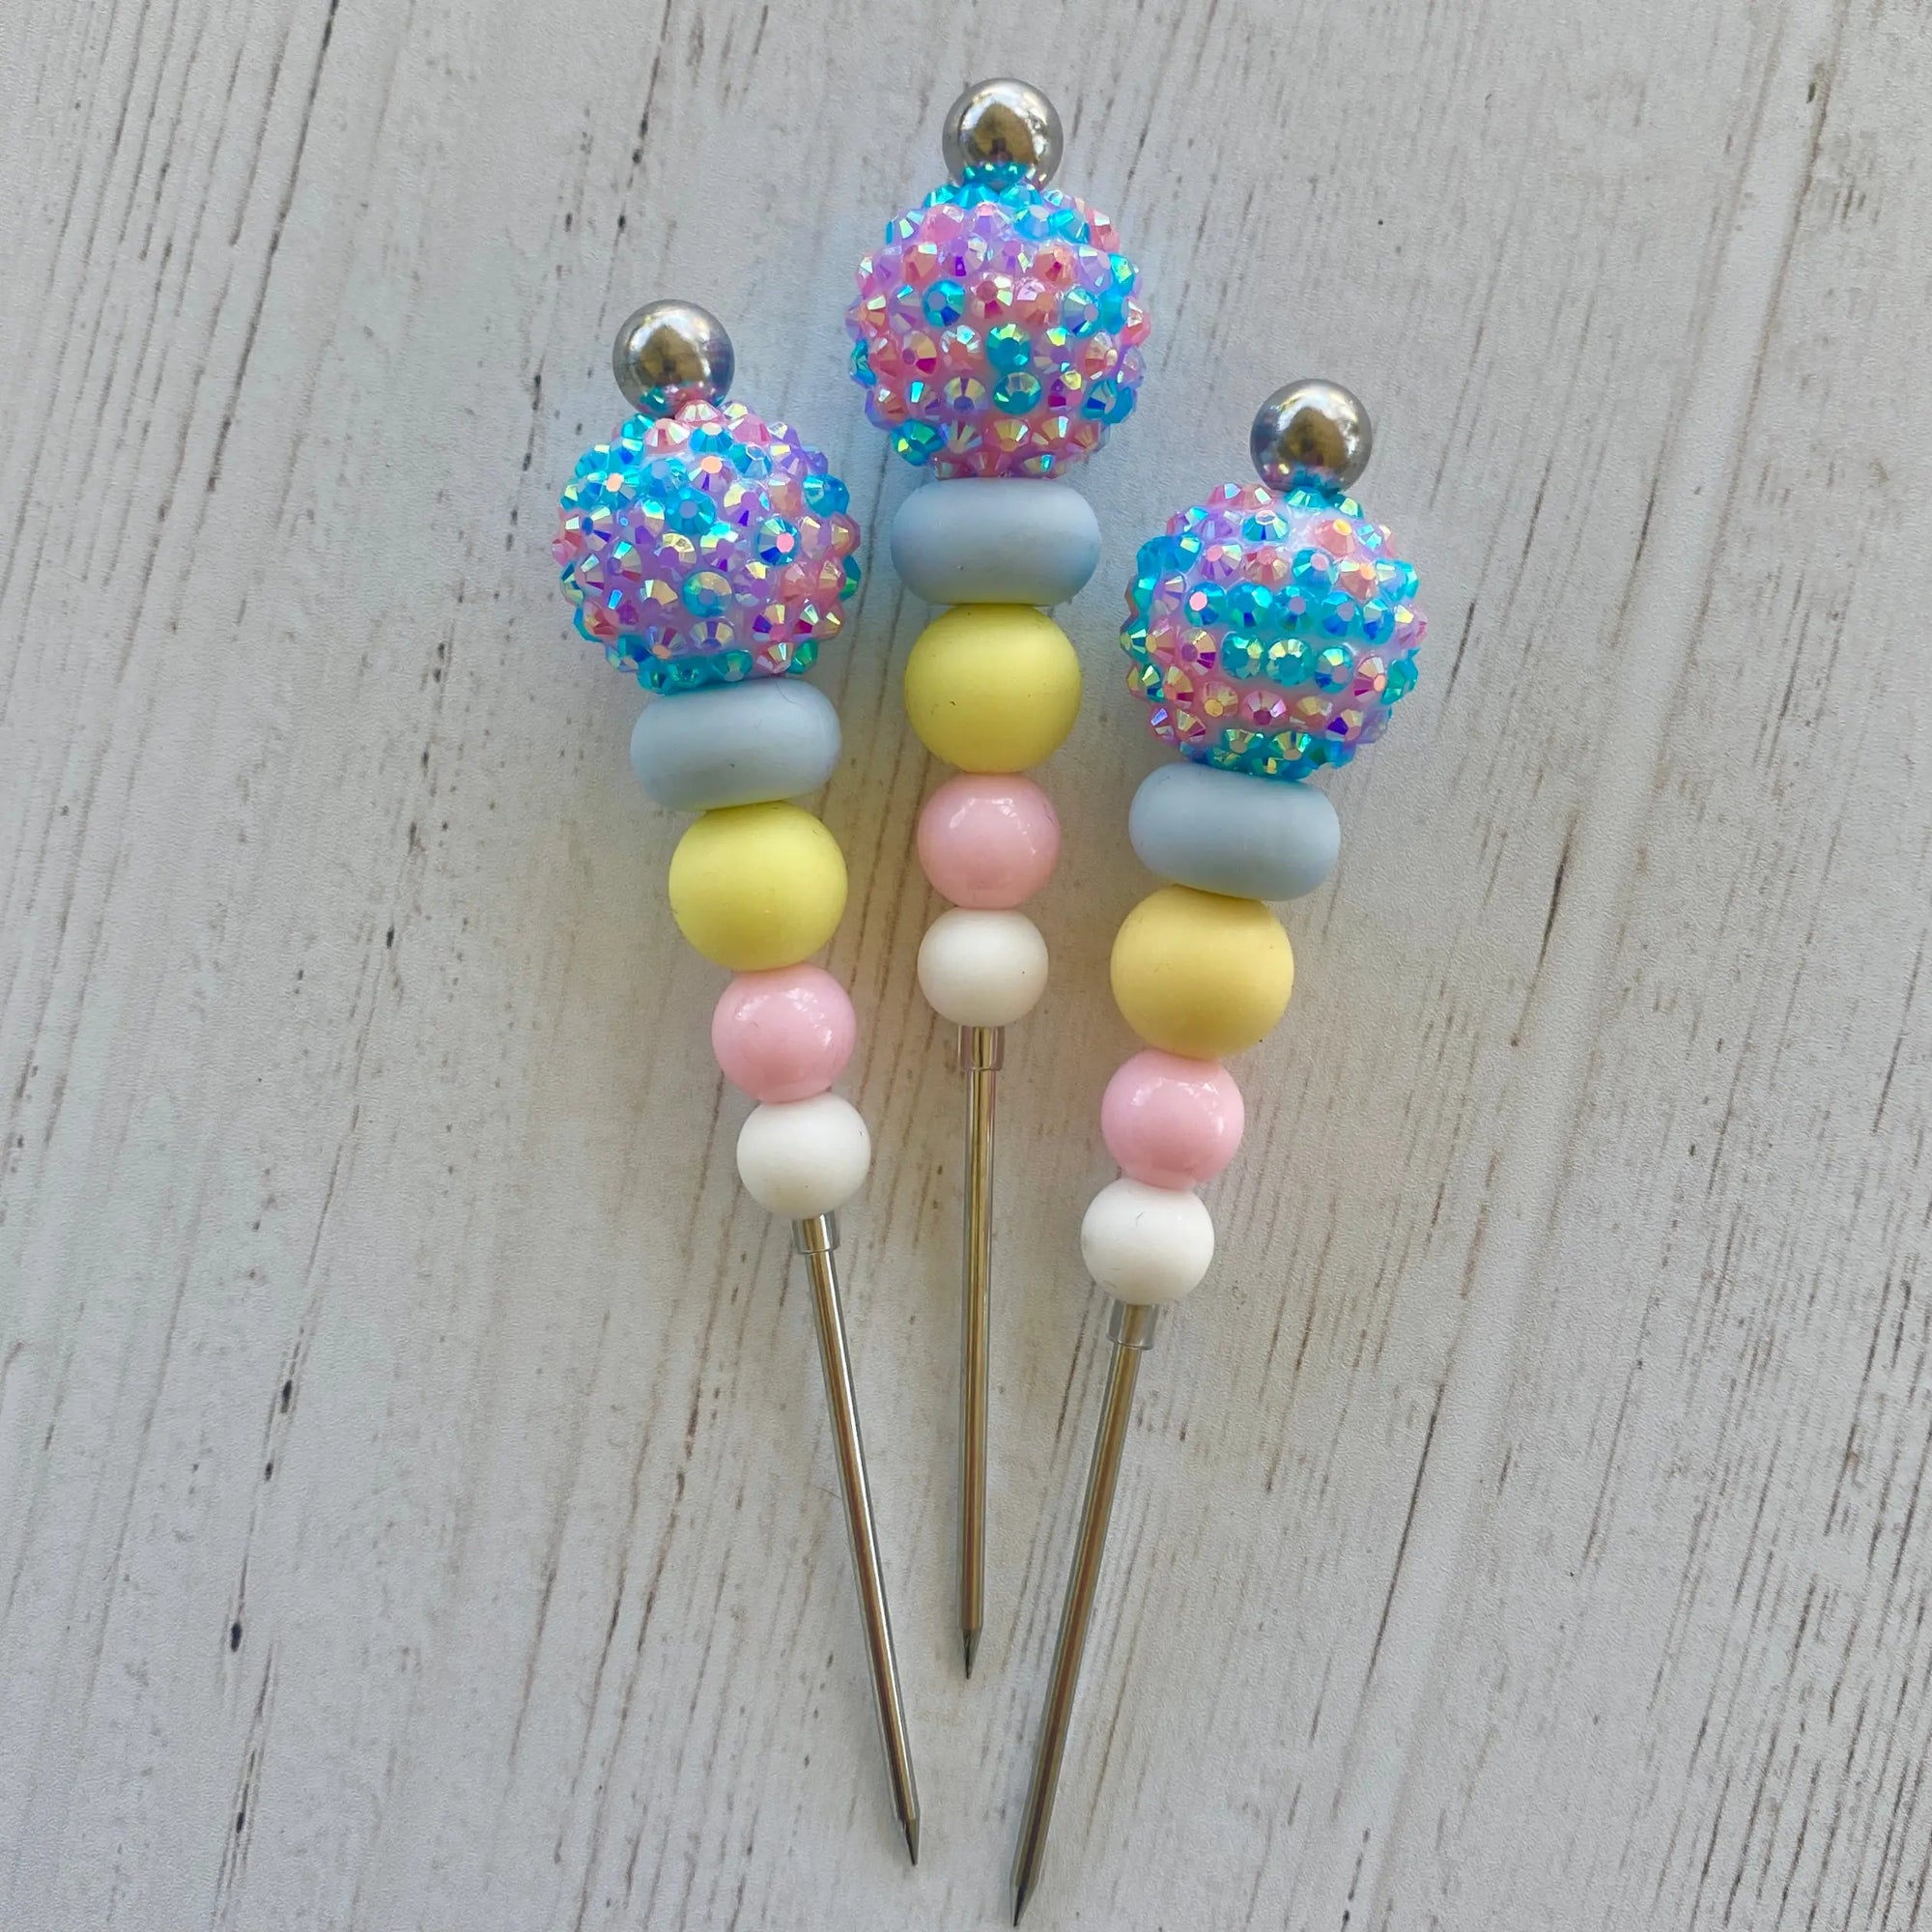 Decorating Scribe Tool with Beads – The Flour Box